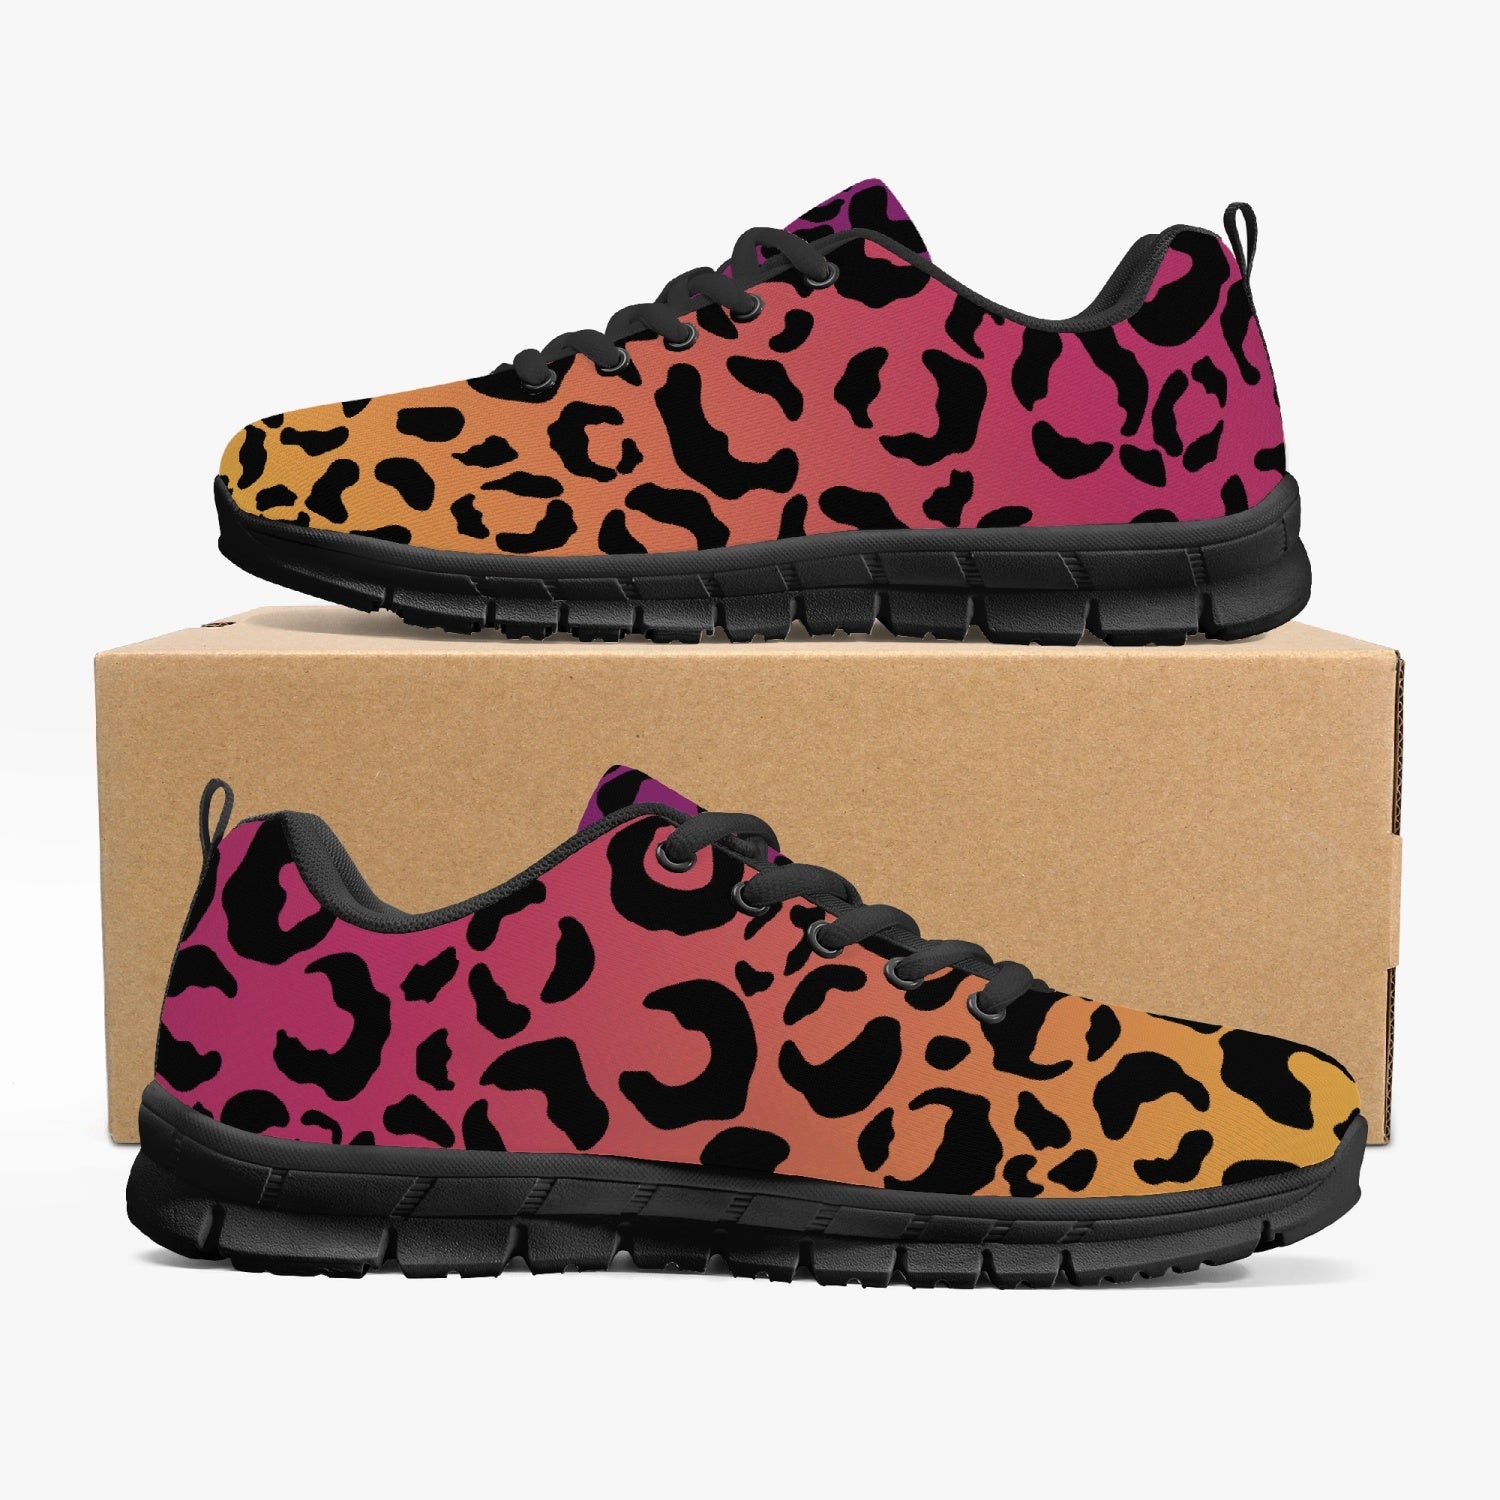 Women's Red Yellow Leopard Cheetah Print Workout Gym Running Sneakers